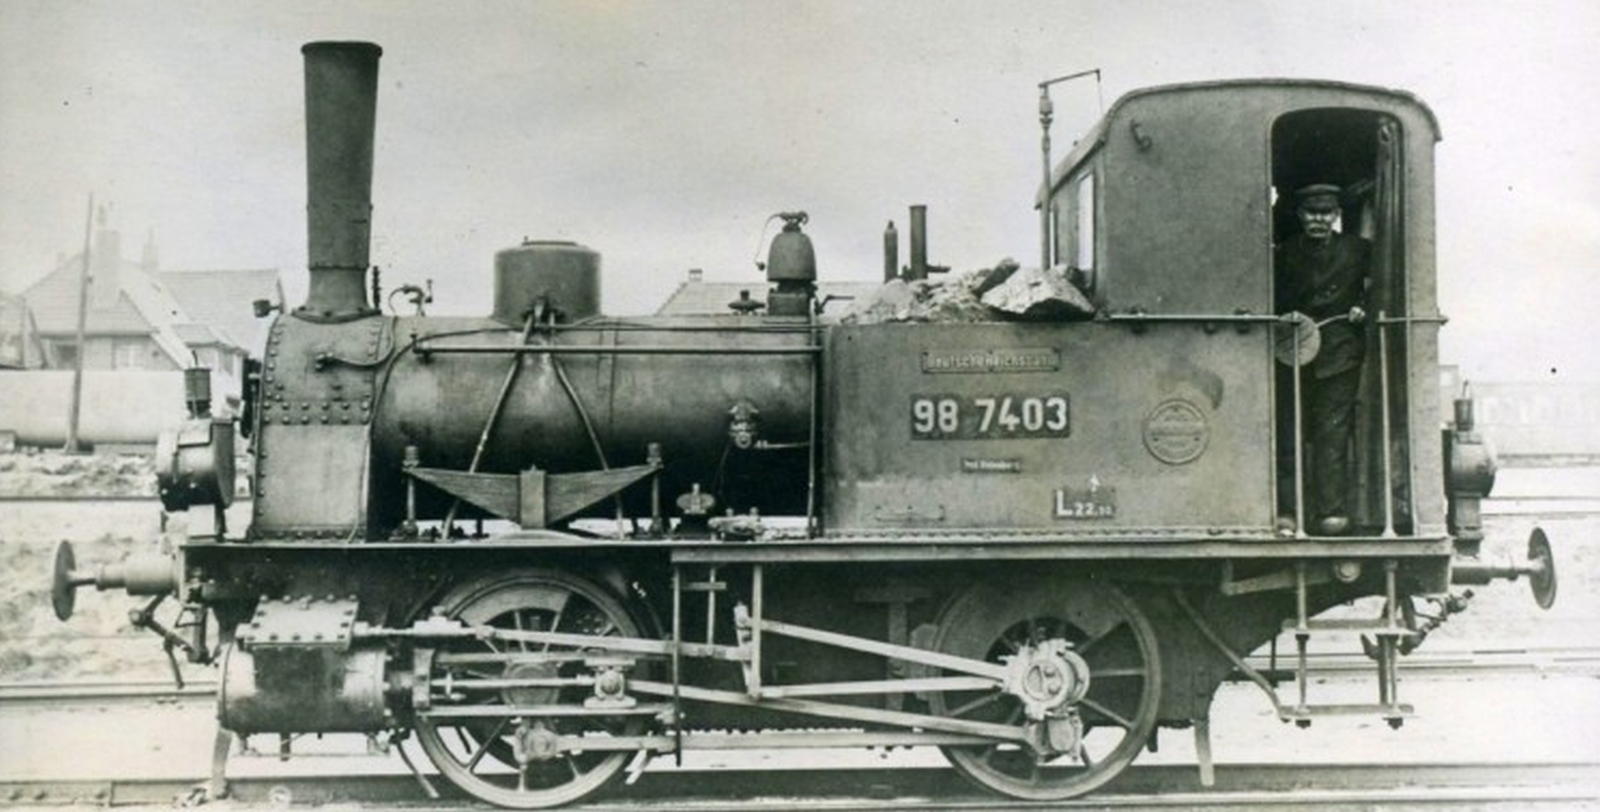 Ex No. 80 “Welle” as 98 7403